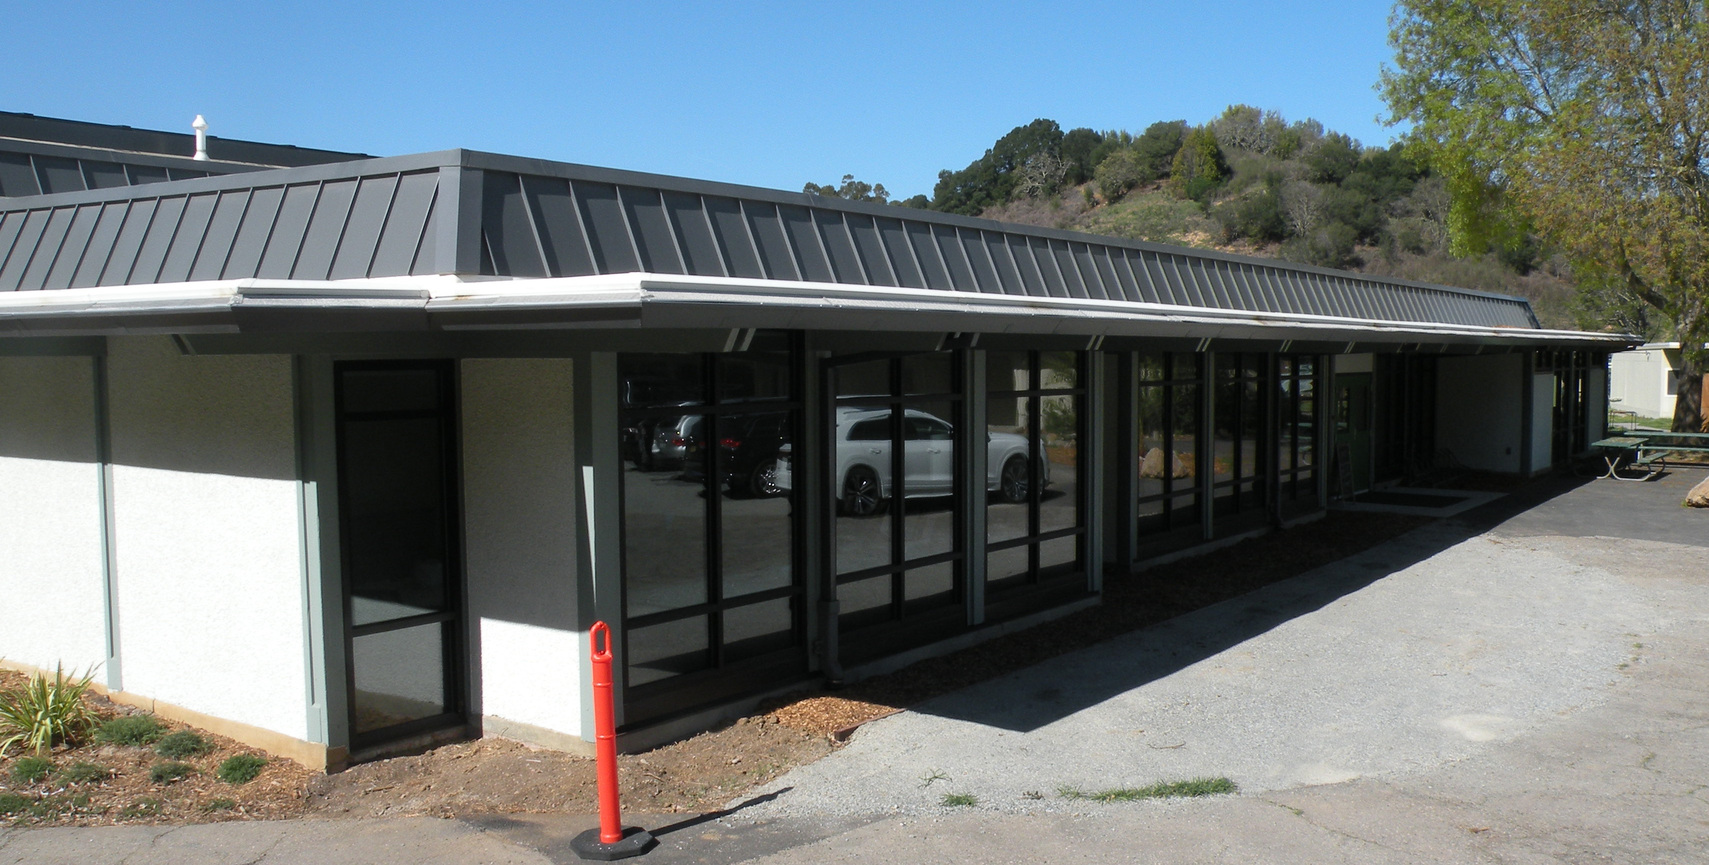 Insulated glass storefront